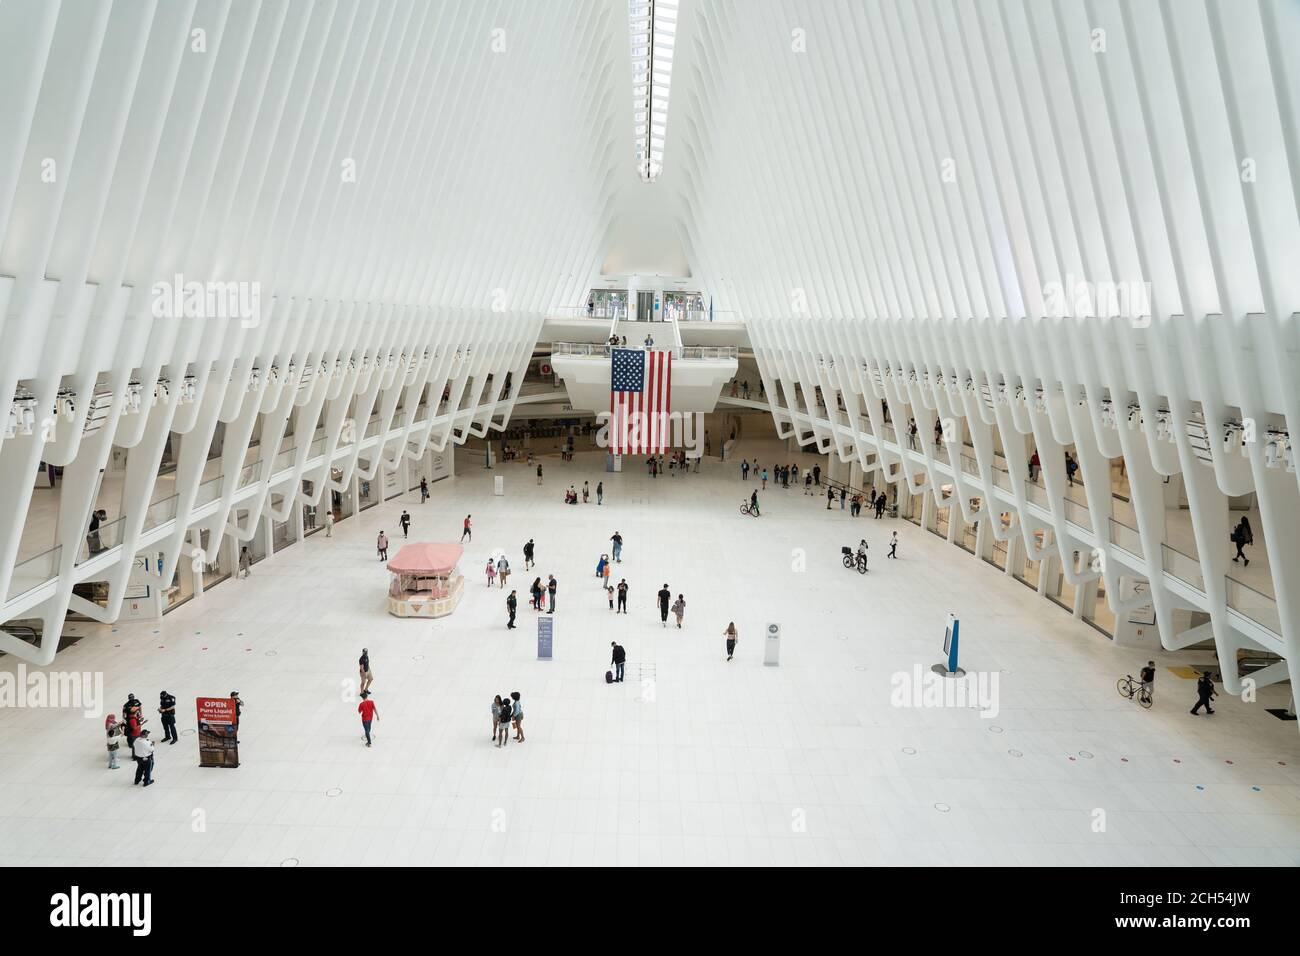 NEW YORK, NEW YORK - SEPTEMBER 13, 2020: The Oculus transit hub seen as the city continues re-opening following COVID-19 imposed restrictions. Stock Photo